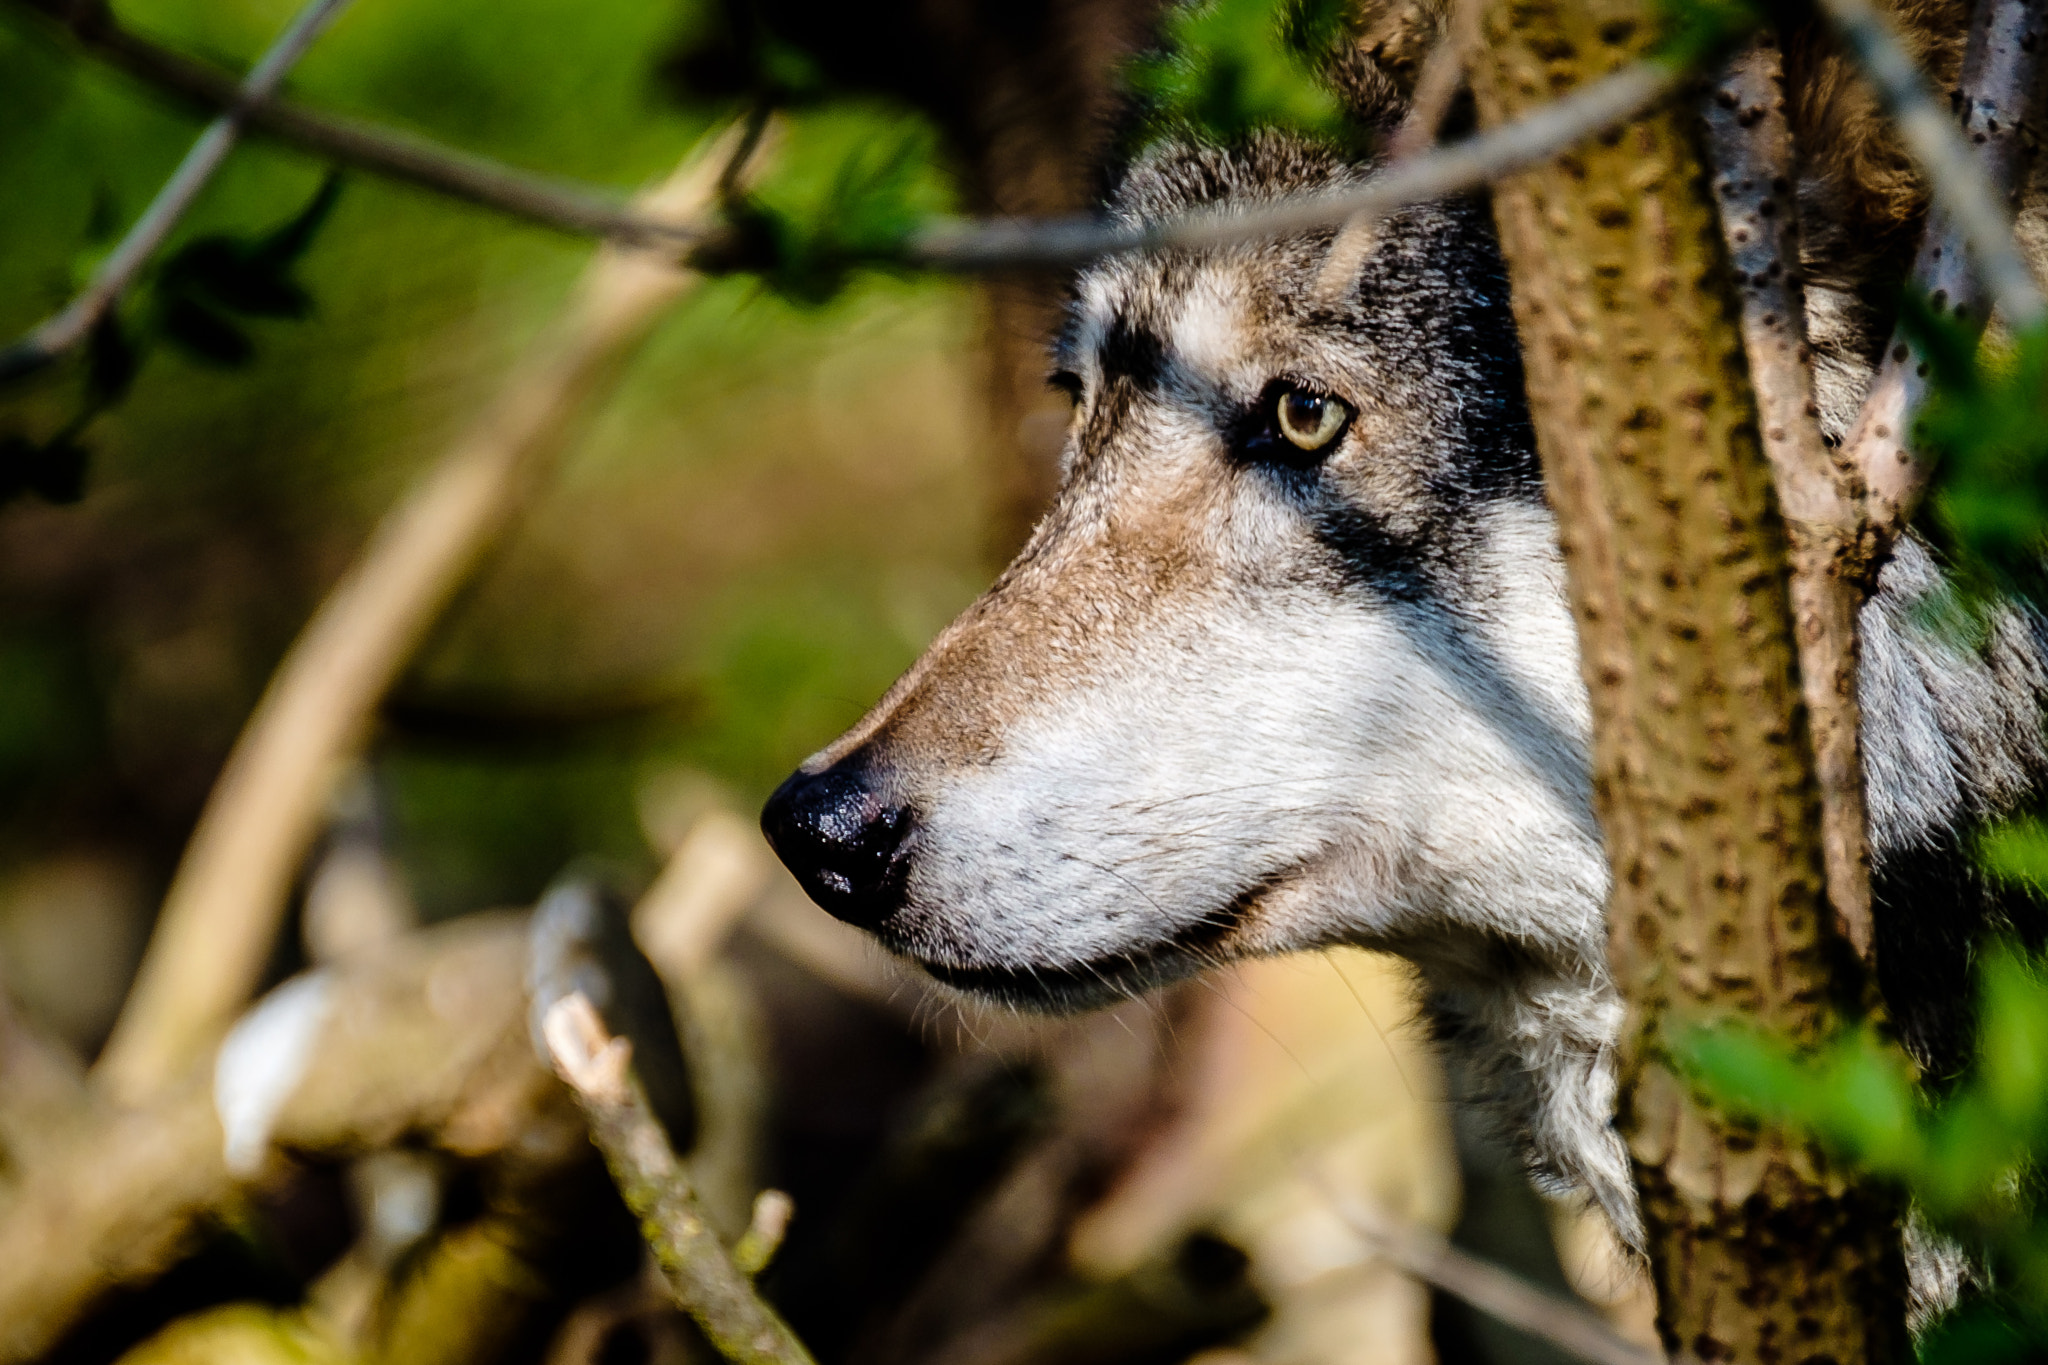 XF100-400mmF4.5-5.6 R LM OIS WR + 1.4x sample photo. Wolf in the bushes photography